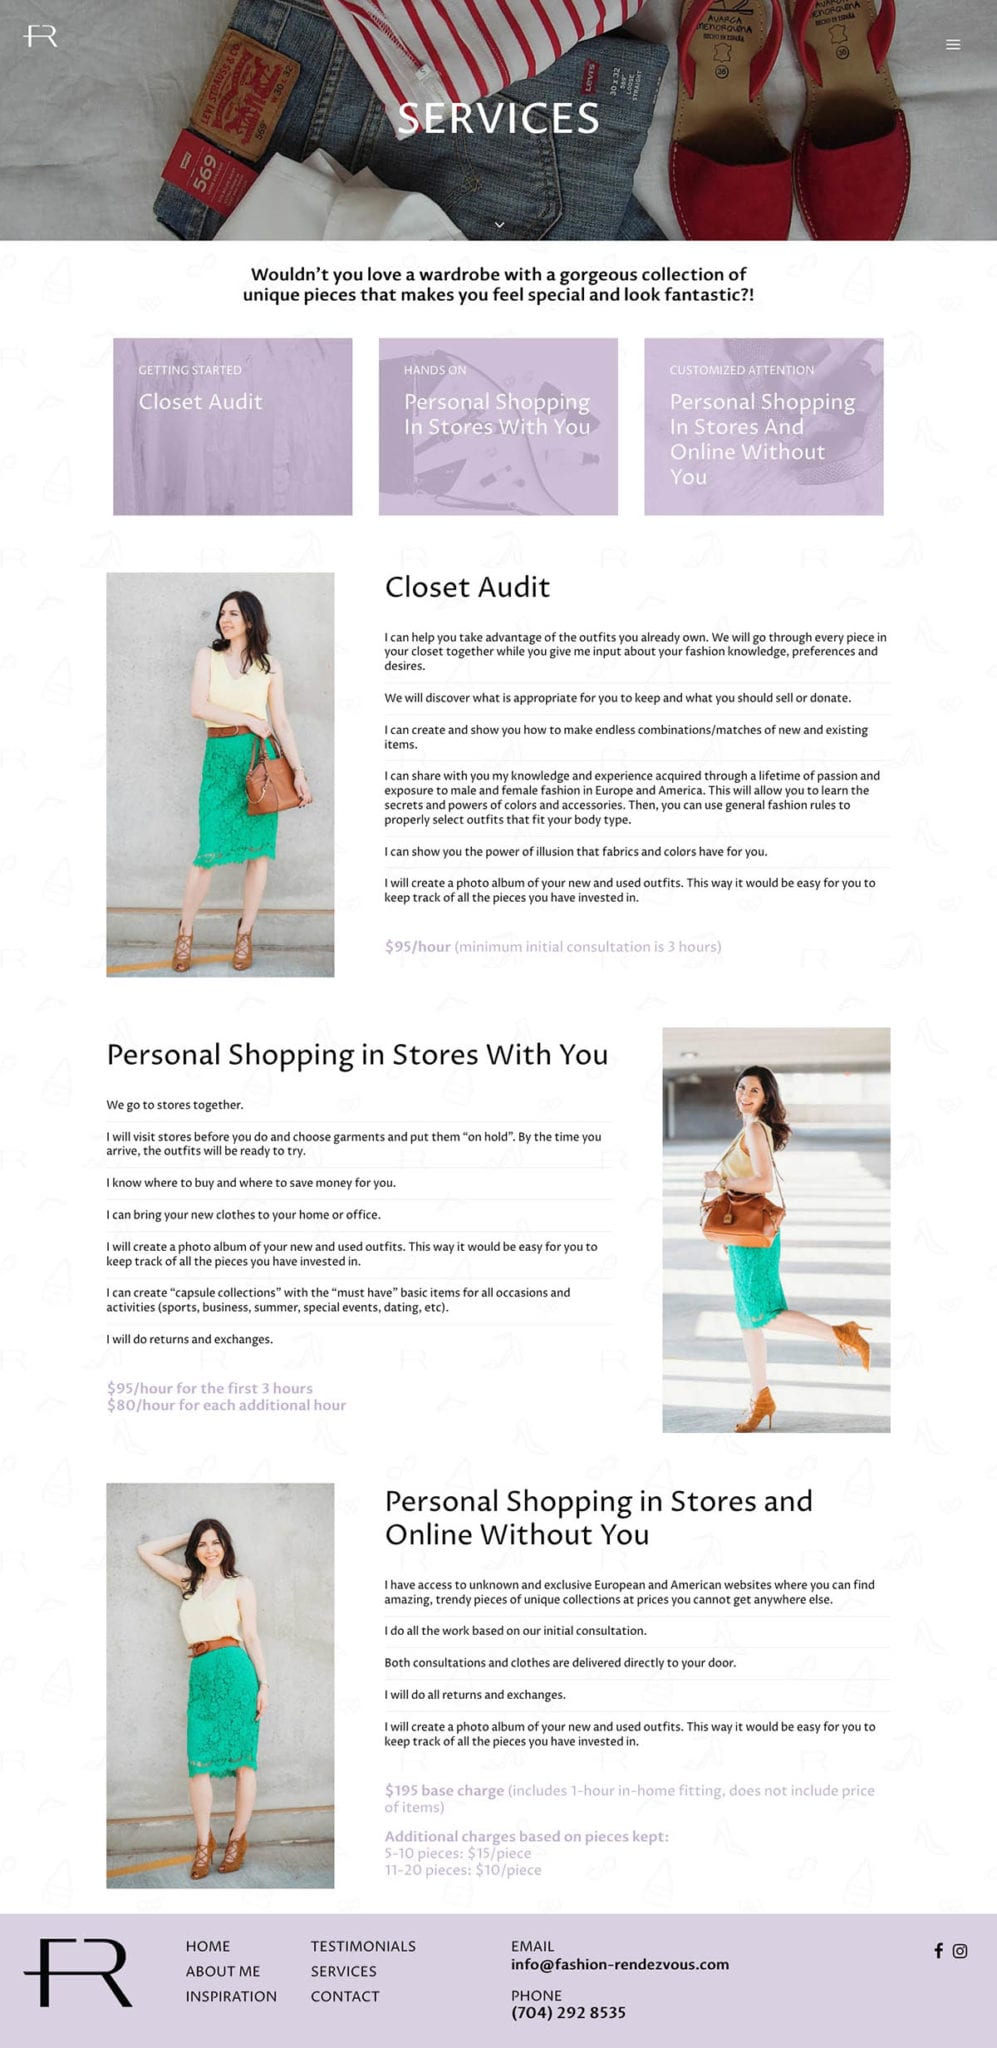 fashion rendezvous website screenshot services page